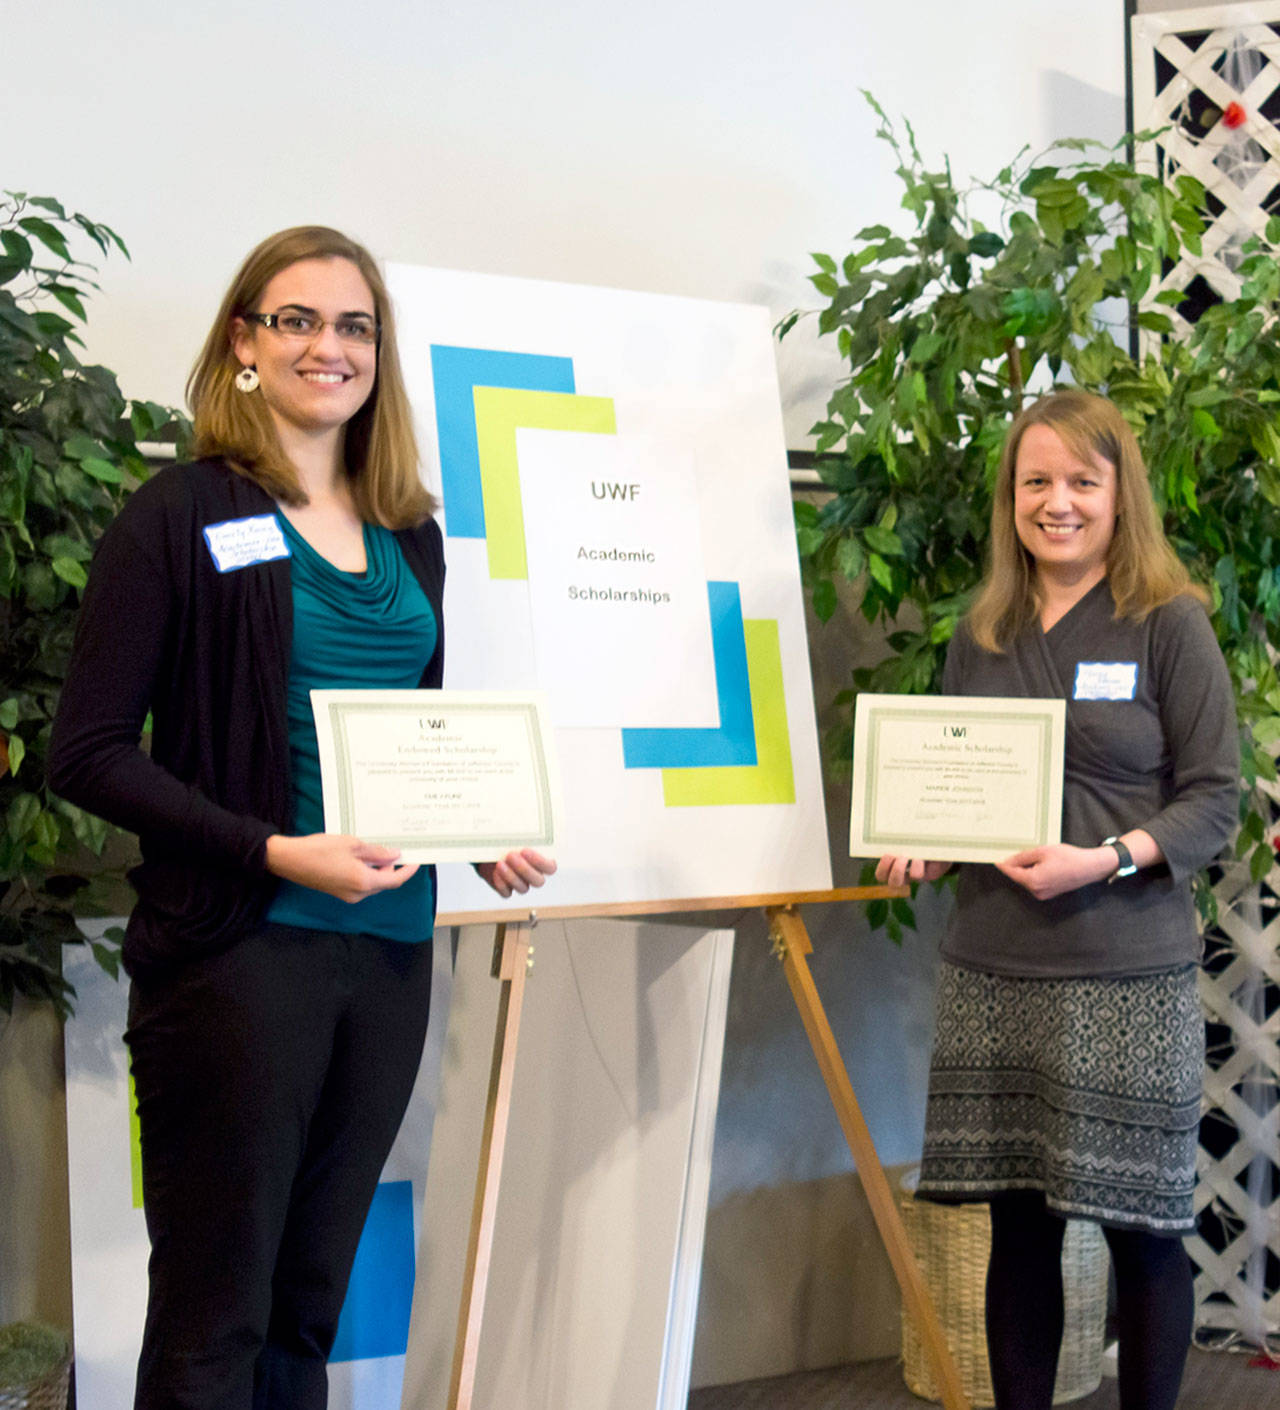 Scholarship winners Emily Kunz, left, and Maren Johnson were among 32 young women recognized during the May meeting of the Association of American University Women of Port Townsend and its affiliate, the University Women’s Foundation of Jefferson County.